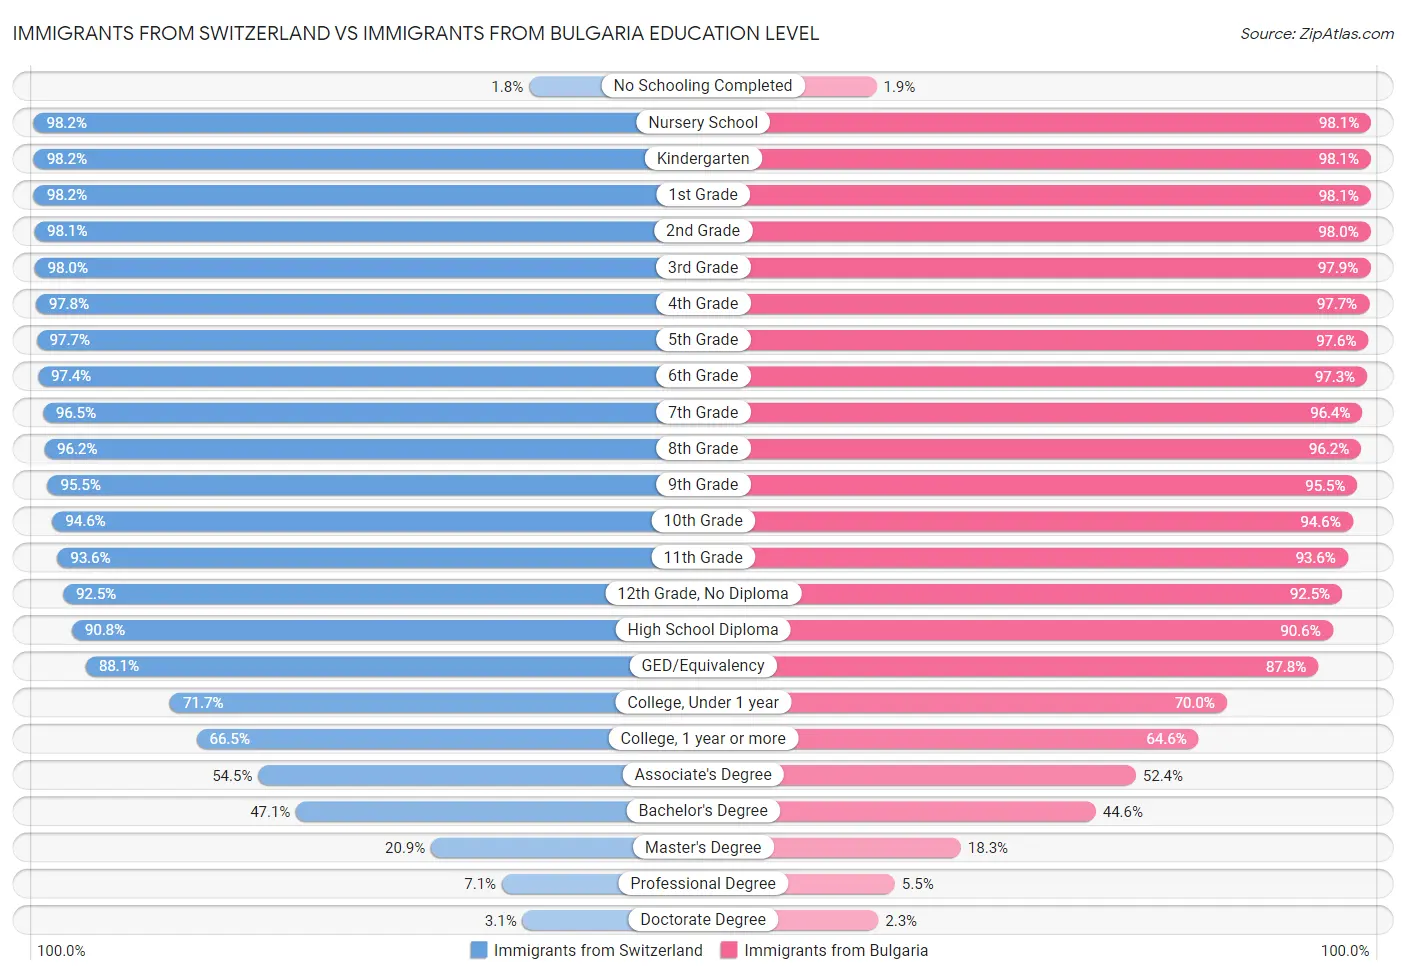 Immigrants from Switzerland vs Immigrants from Bulgaria Education Level